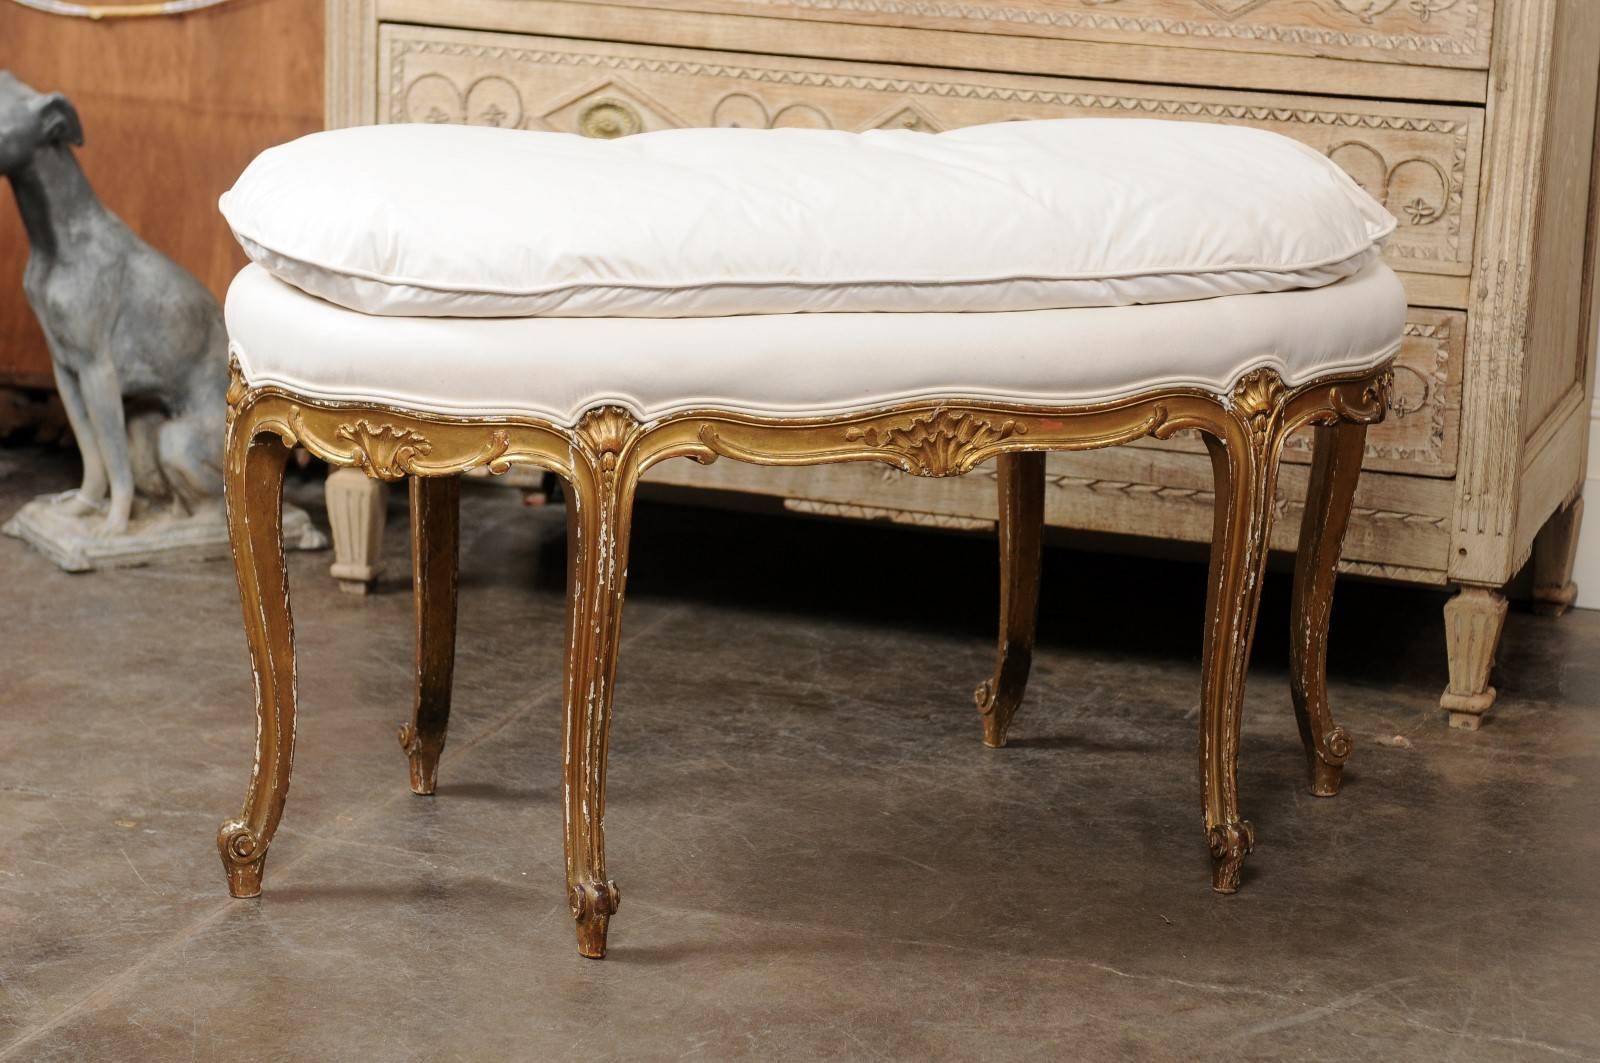 This exquisite French Louis XV style bench from the early 20th century features an oval shaped smooth muslin upholstered seat with custom-made cushion over a lovely giltwood body. The curvy skirt is delicately decorated with stylized shell motifs.